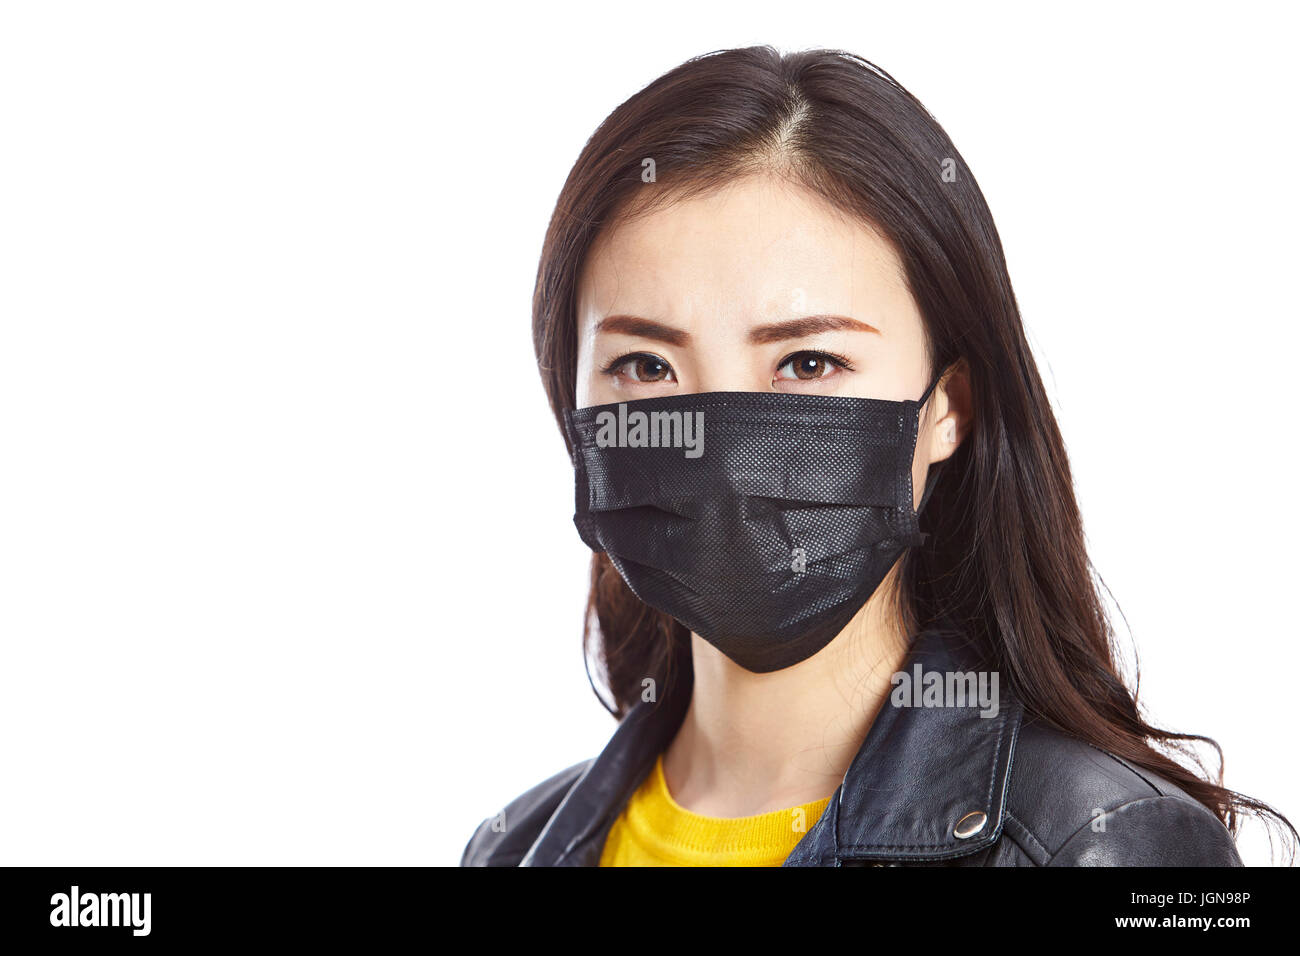 young asian woman wearing black mask staring at camera, isolated on white background. Stock Photo